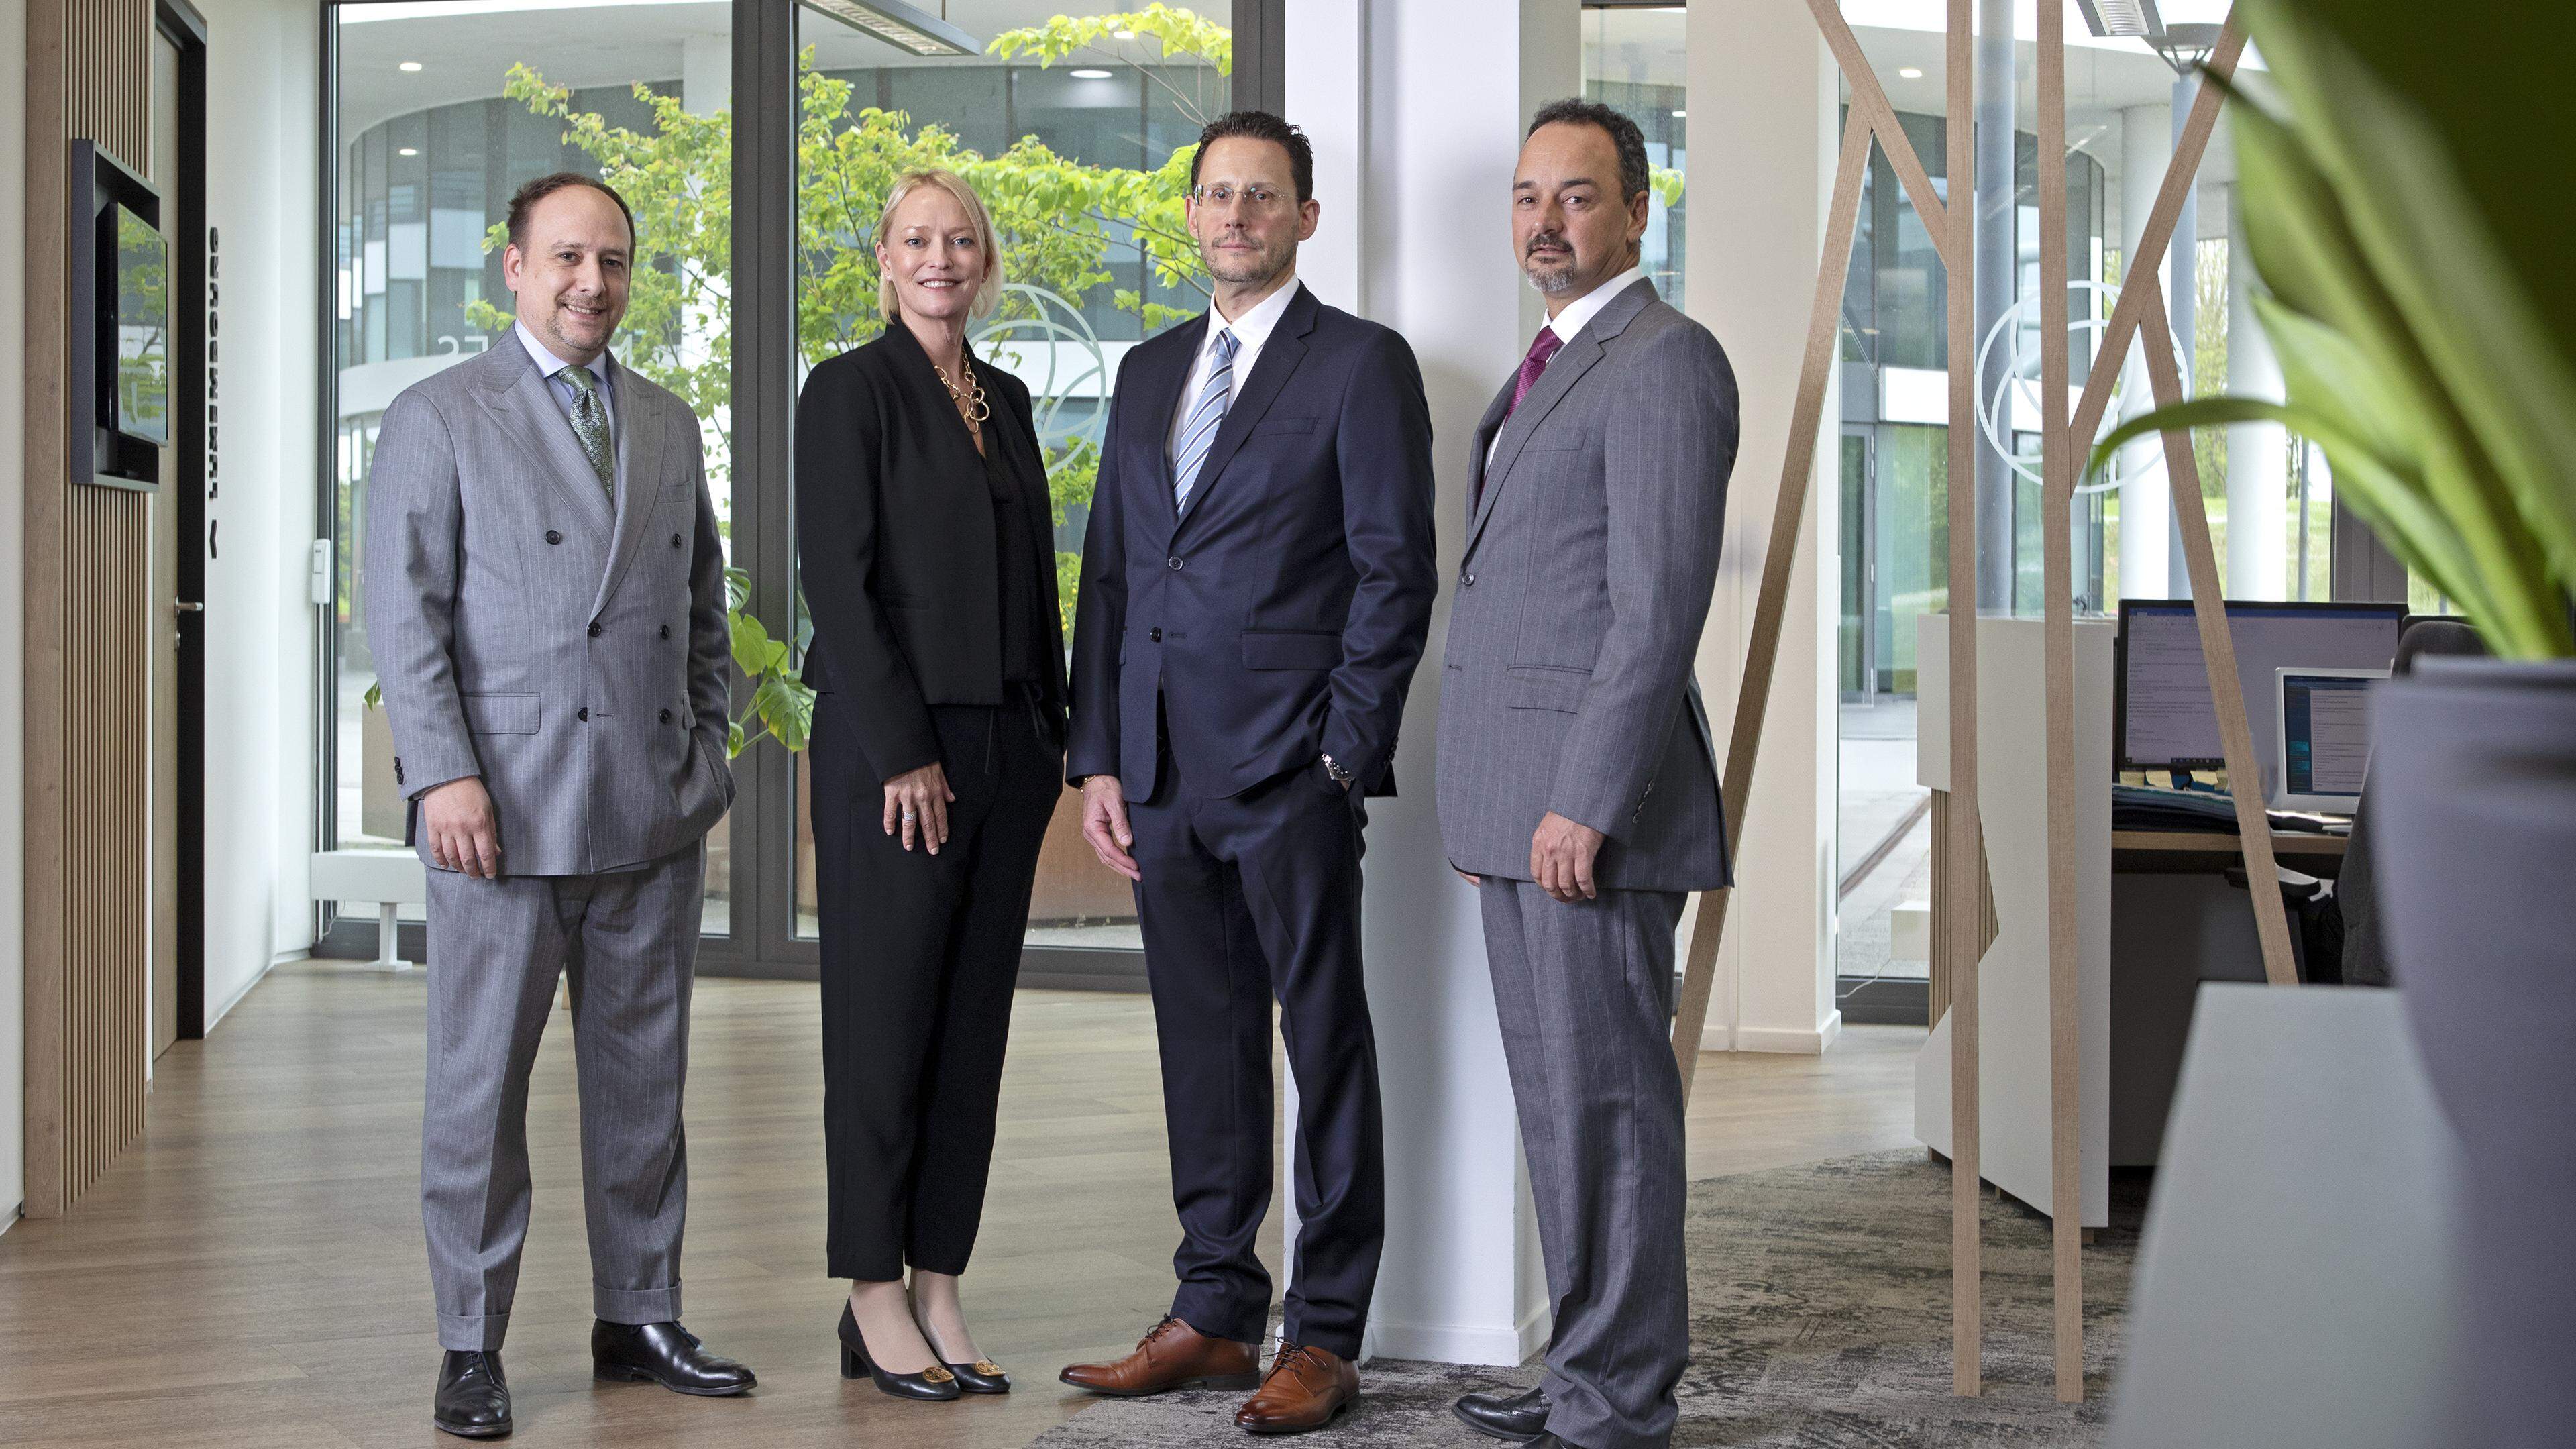 (l.t.r) Arnaud Arrecrgros (co-head of finance practice), Tina Meigh (global head of the finance practice), Yann Hilpert (co-head of finance practice), Johan Terblanche (managing partner)